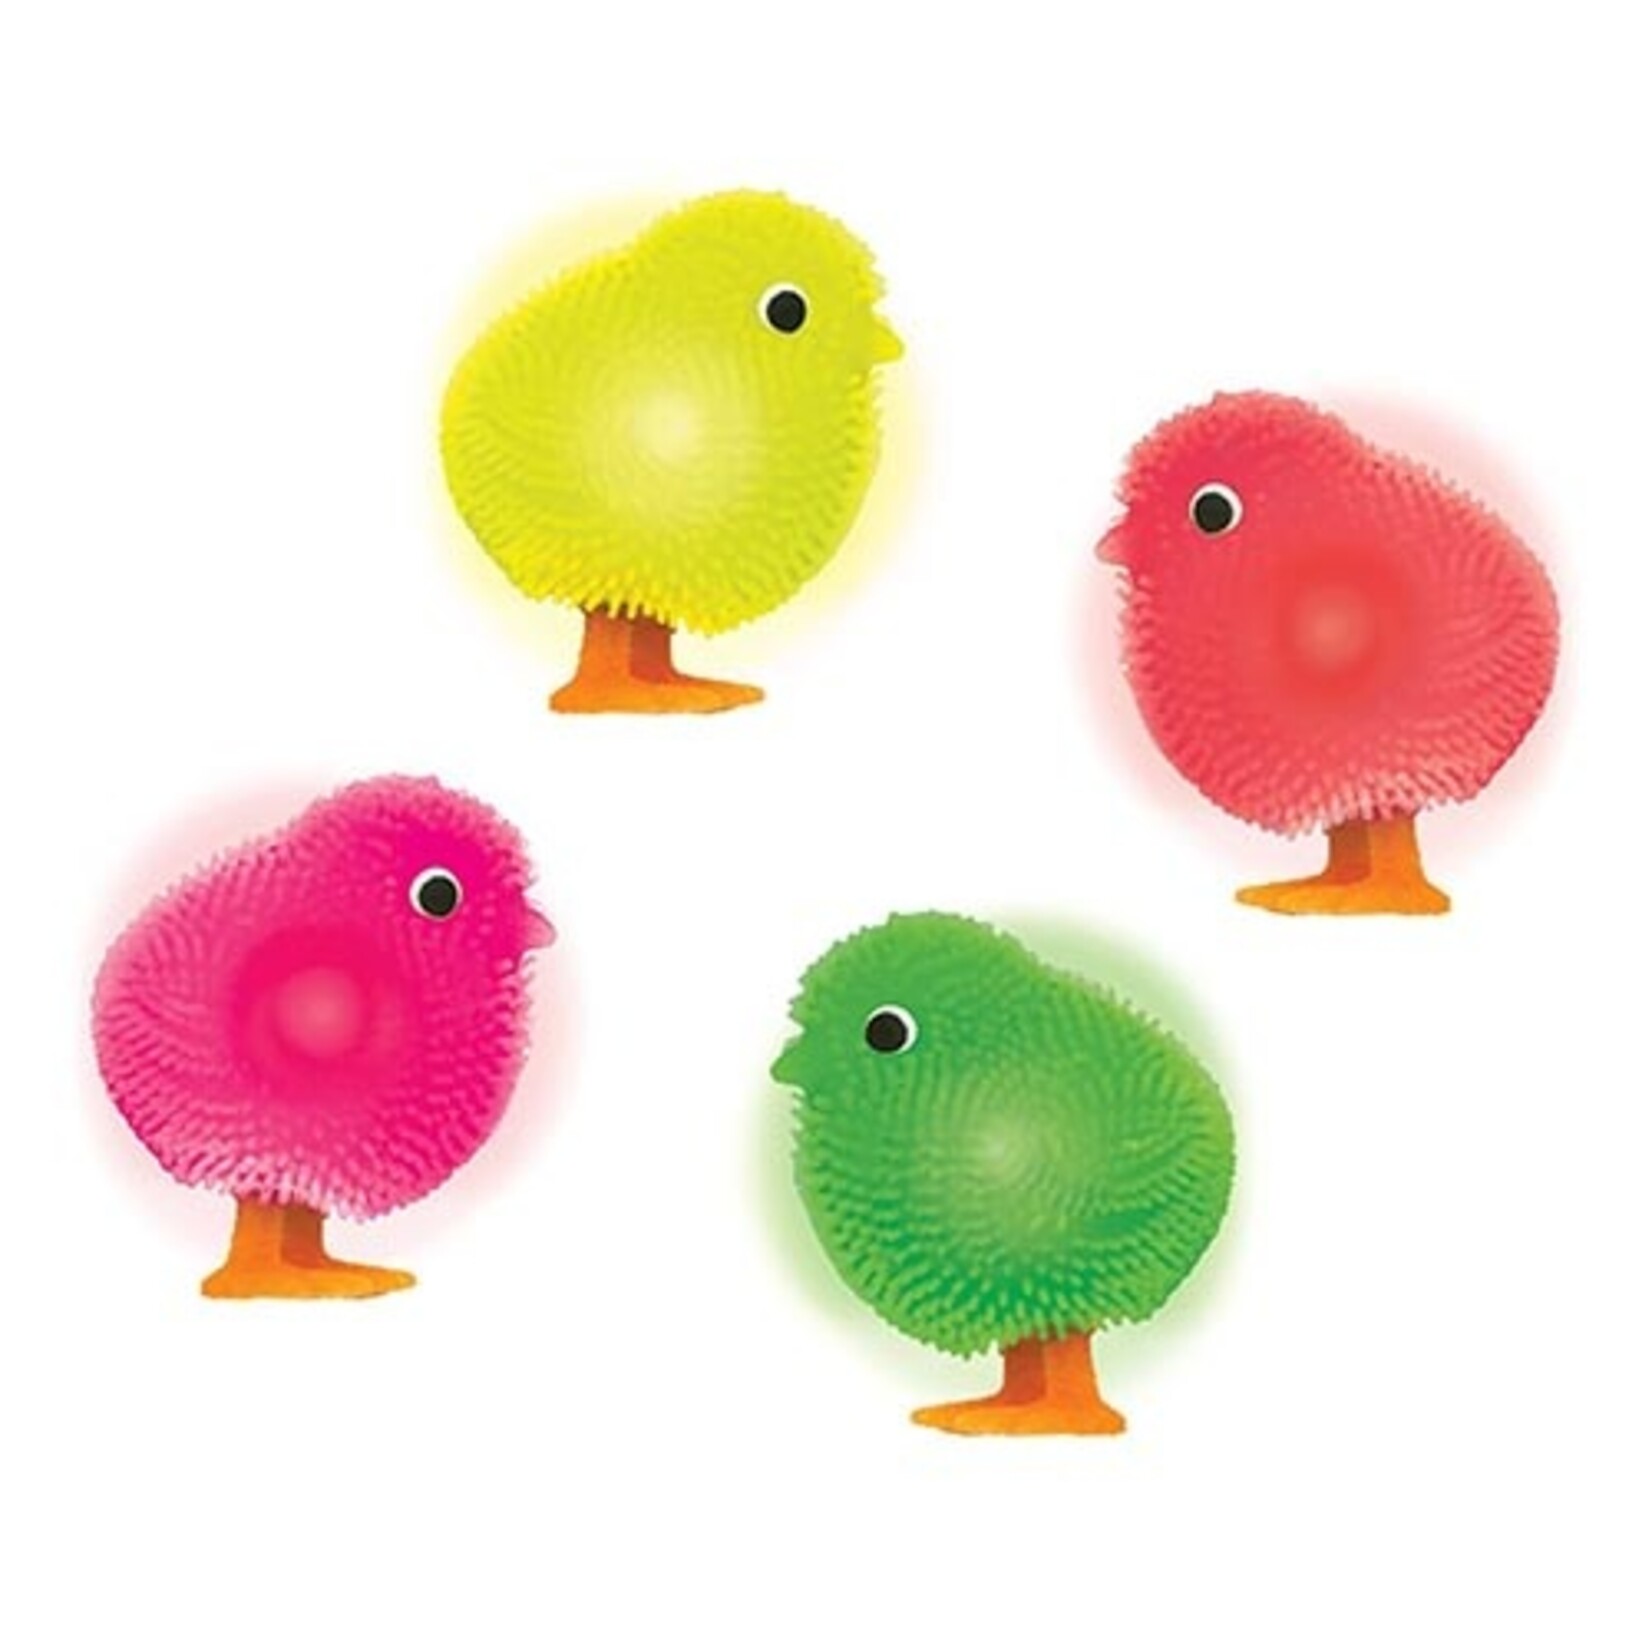 Amscan 2.5" Easter Light-Up Chick - 1ct. (Assorted Colors)